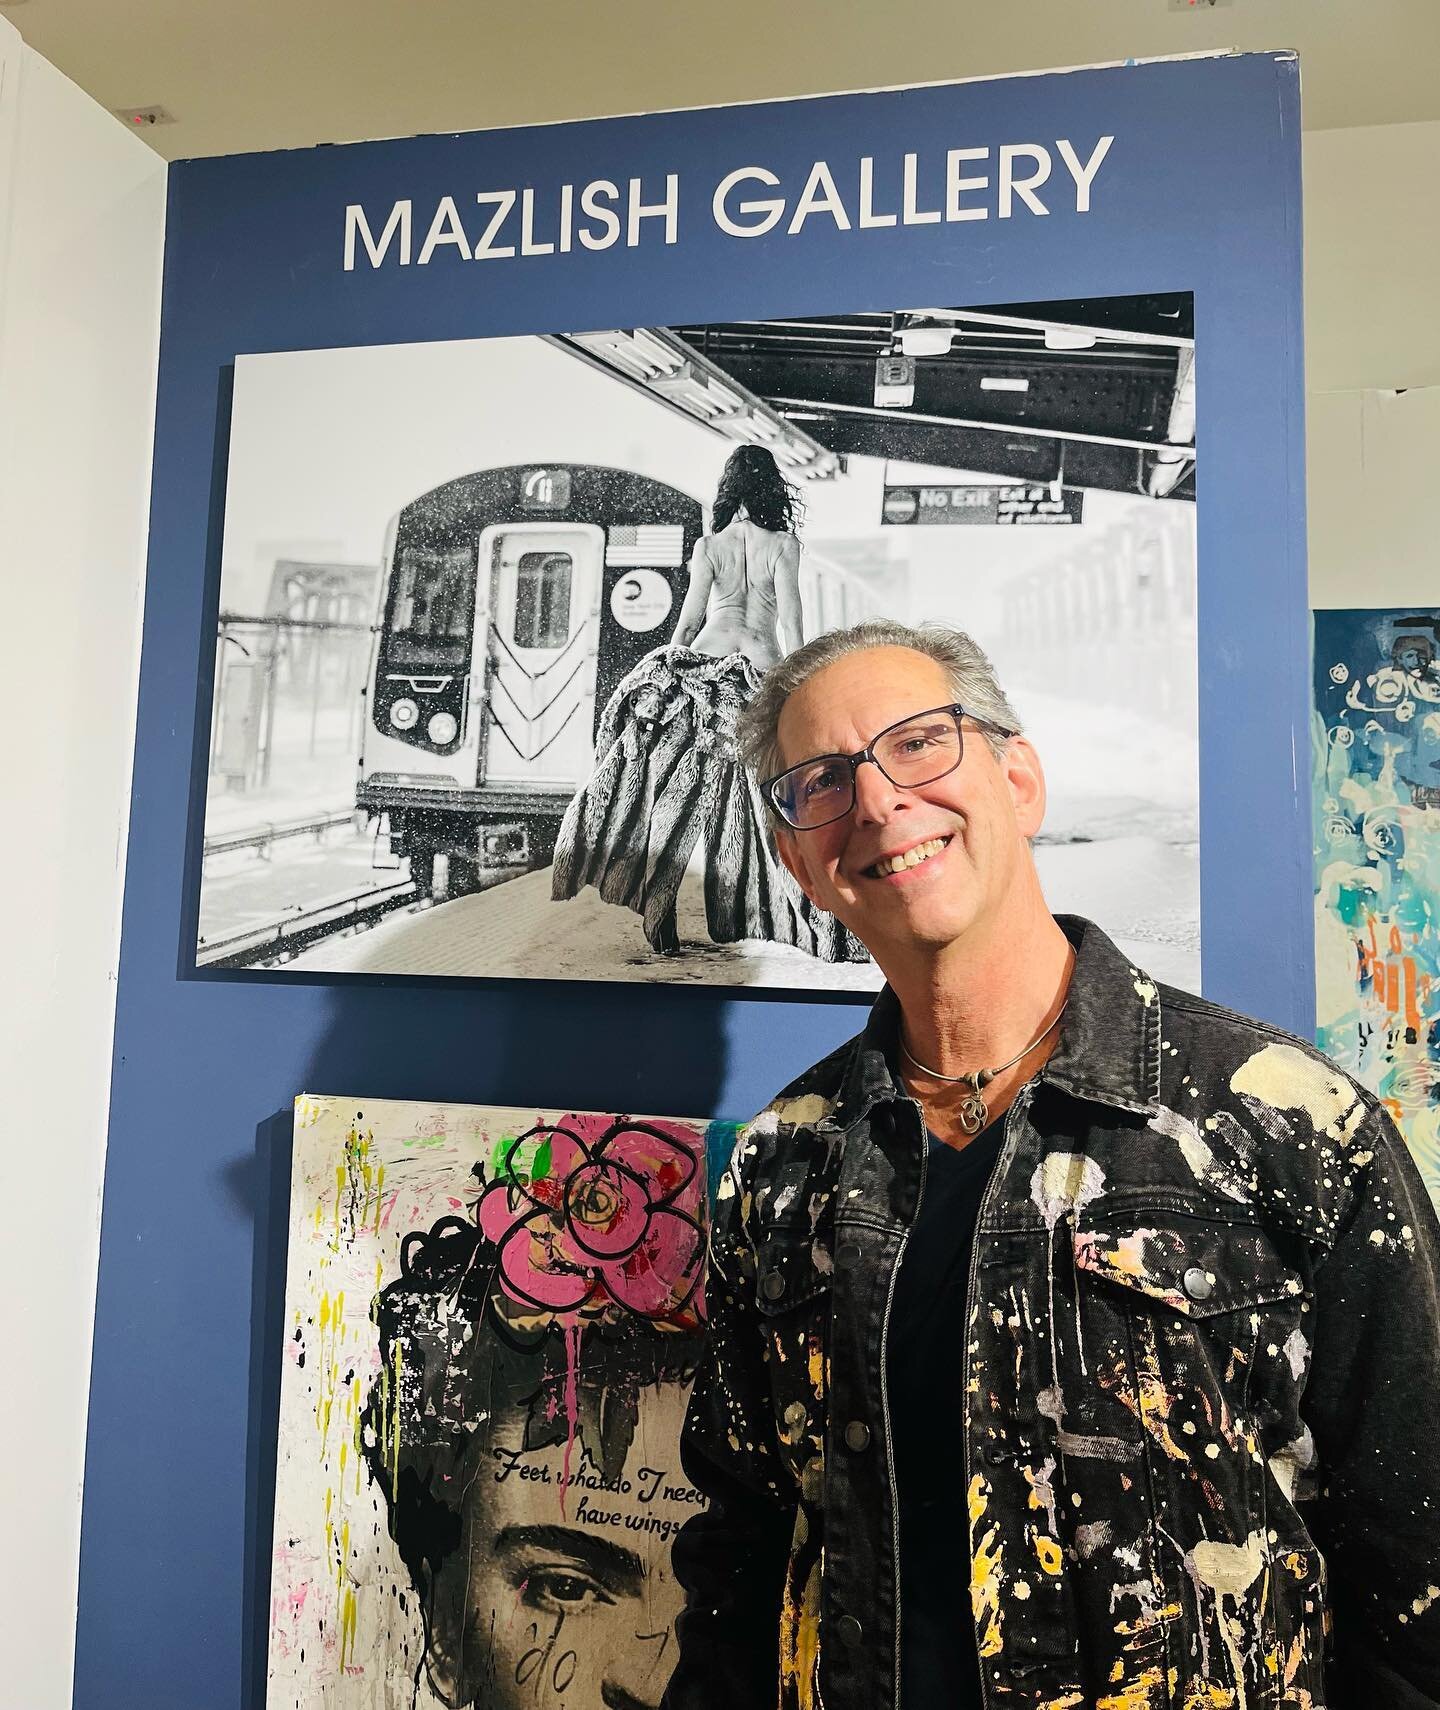 Last night we visited @arthouse.nyc resident #photographer @johnmazlishfineart of @mazlishgallery at the @affordableartfairnyc which opens today at the @metropavilion exhibiting his exiquisite work with @andrewcottonartist @johnherbertwright and @cra